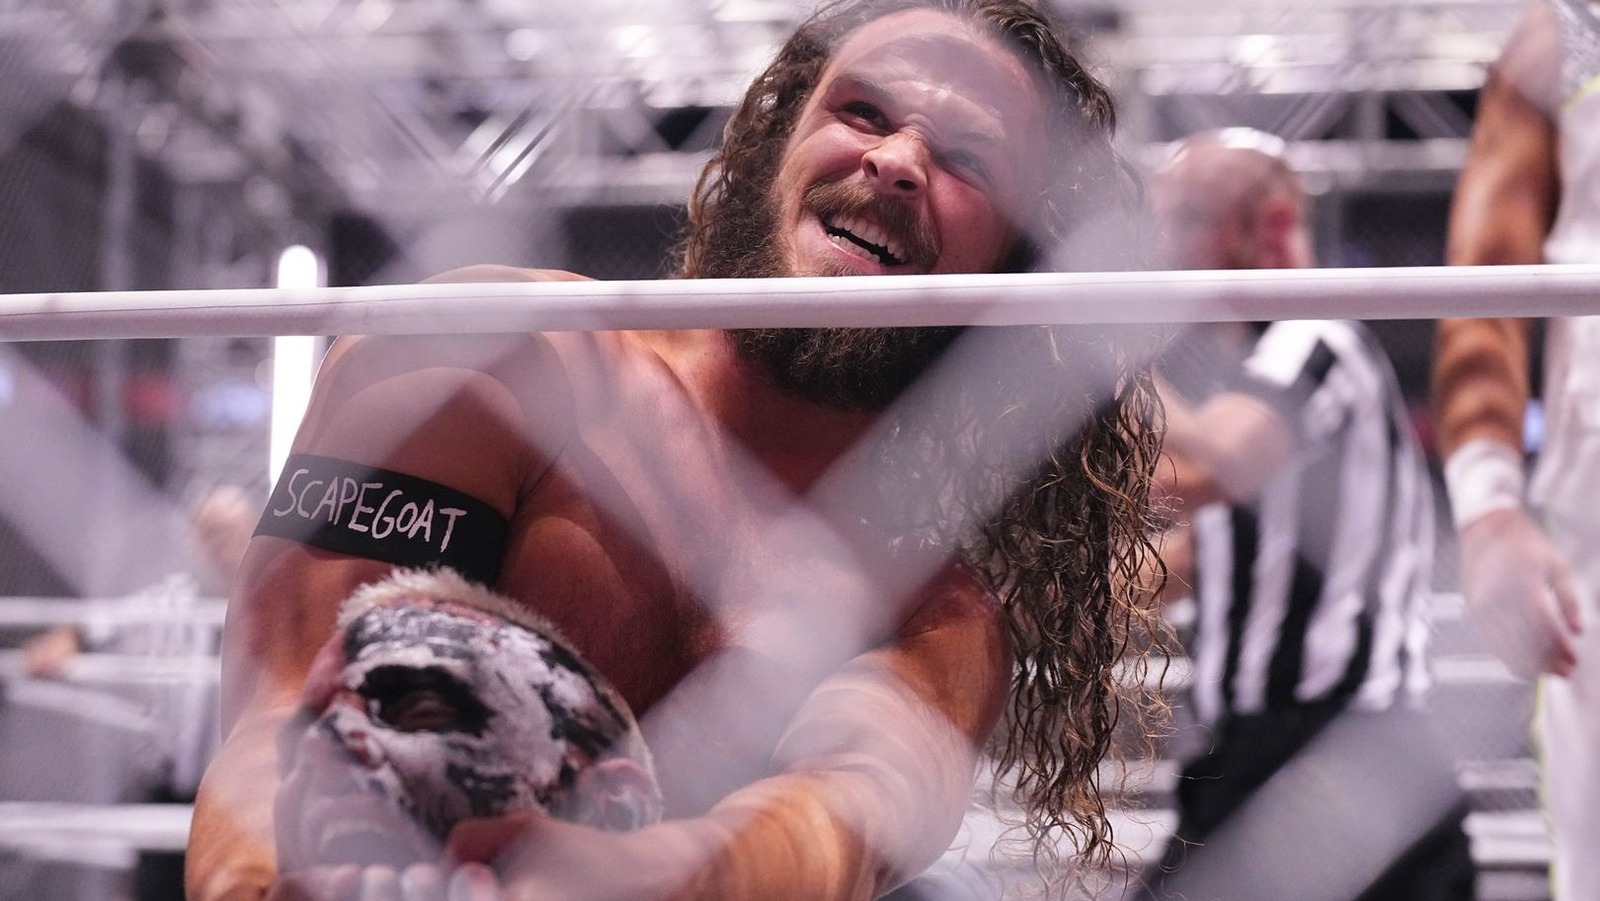 Backstage Details On Contentious Chair Shot In Blood & Guts Match On AEW Dynamite